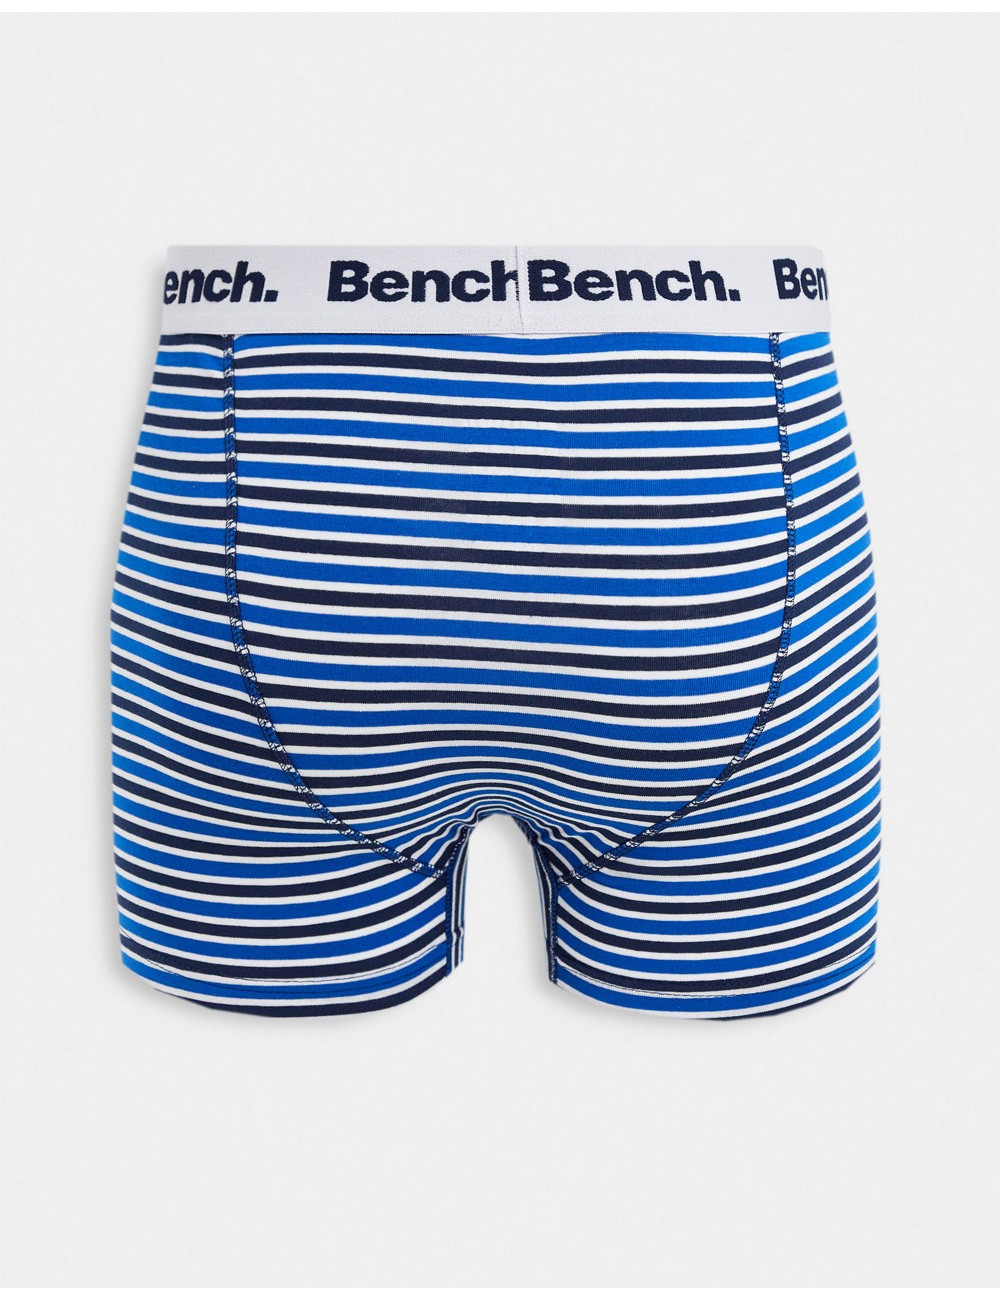 Bench Flynn 3 pack boxers...